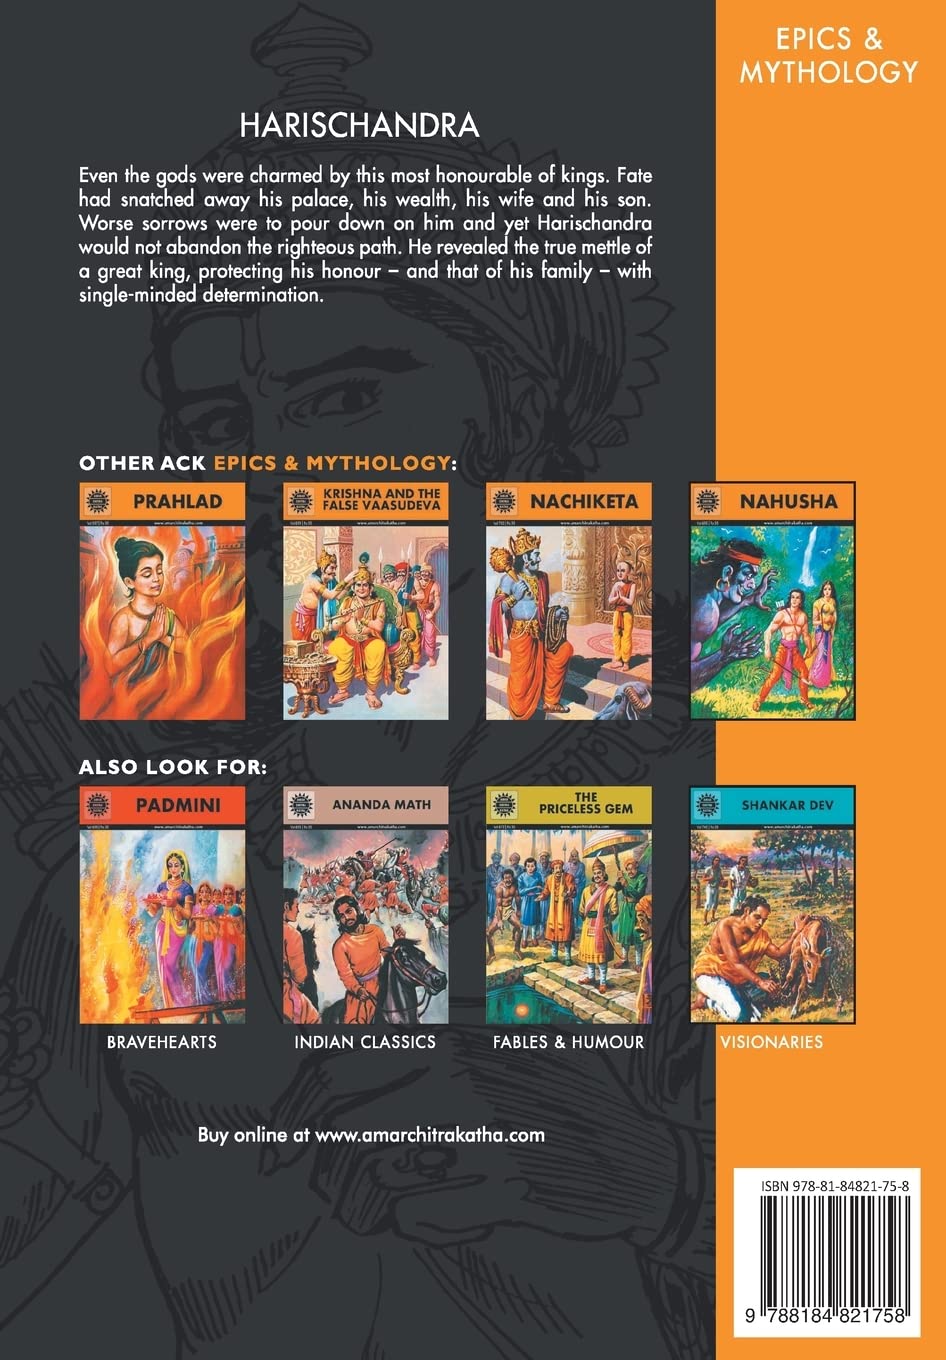 Amar Chitra Katha - Harischandra - The King who Chose Rags over Riches